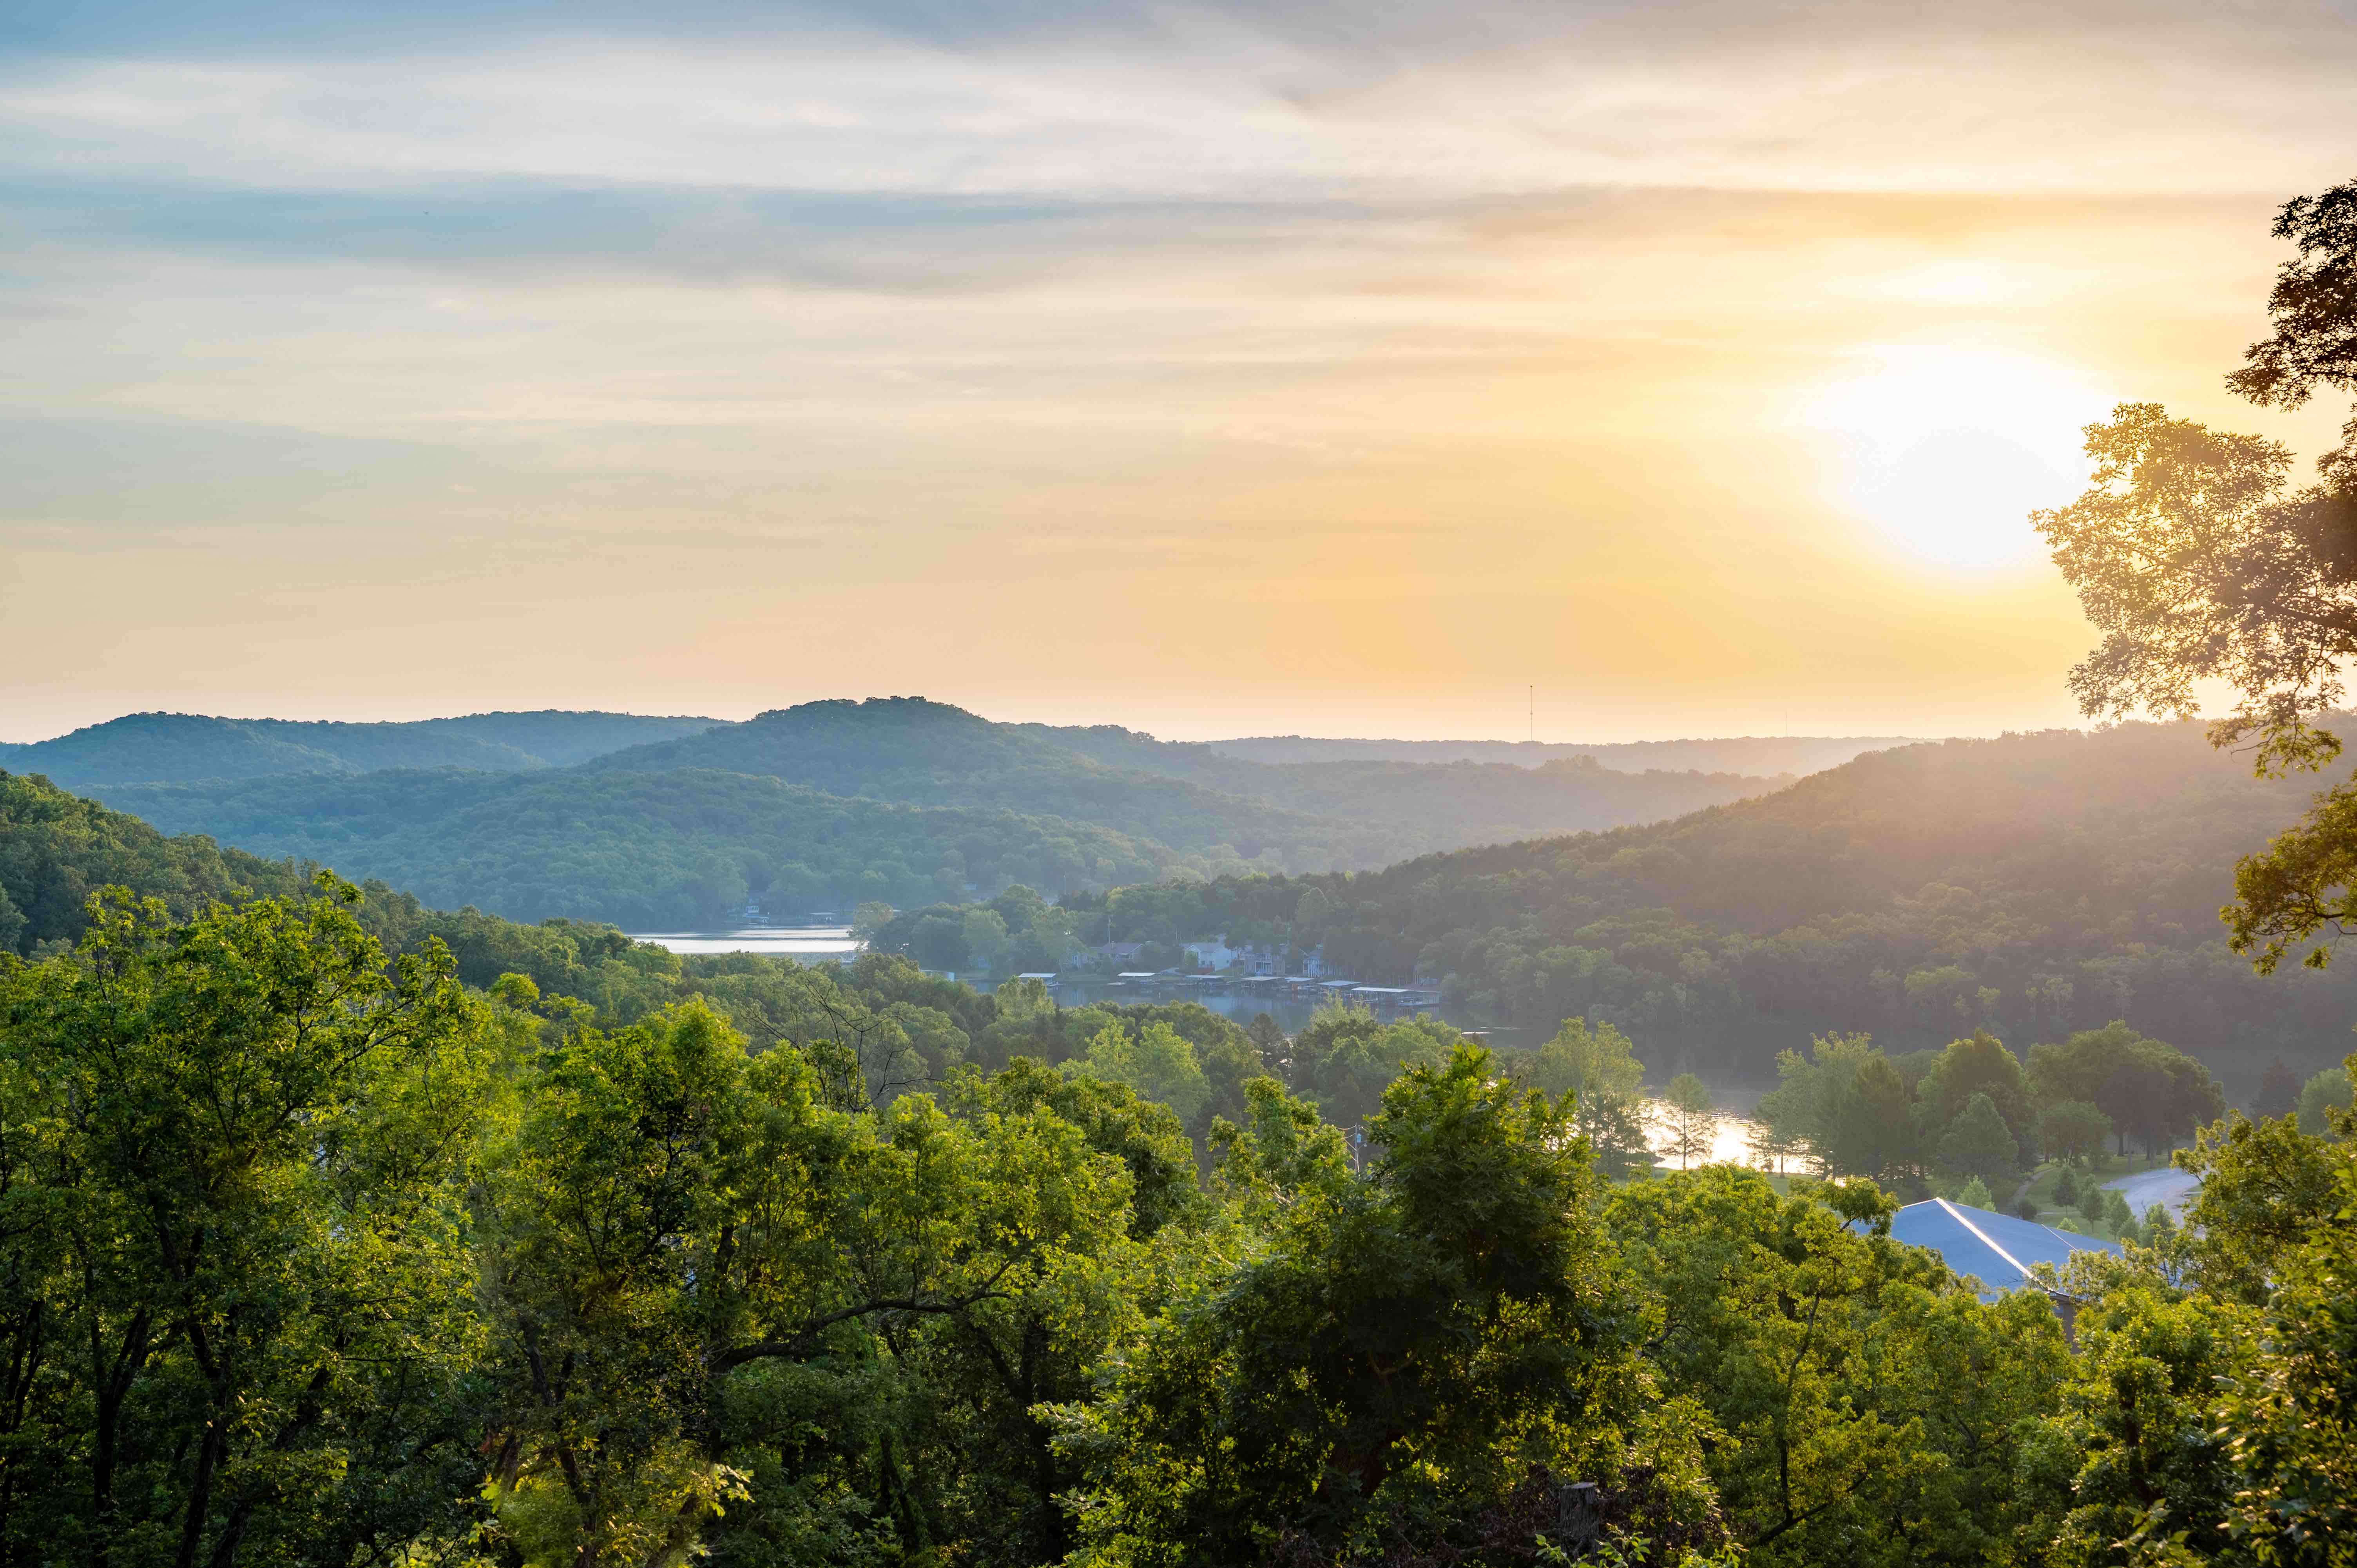 Sun rising over the green hills and blue lake of Ozark, Missouri